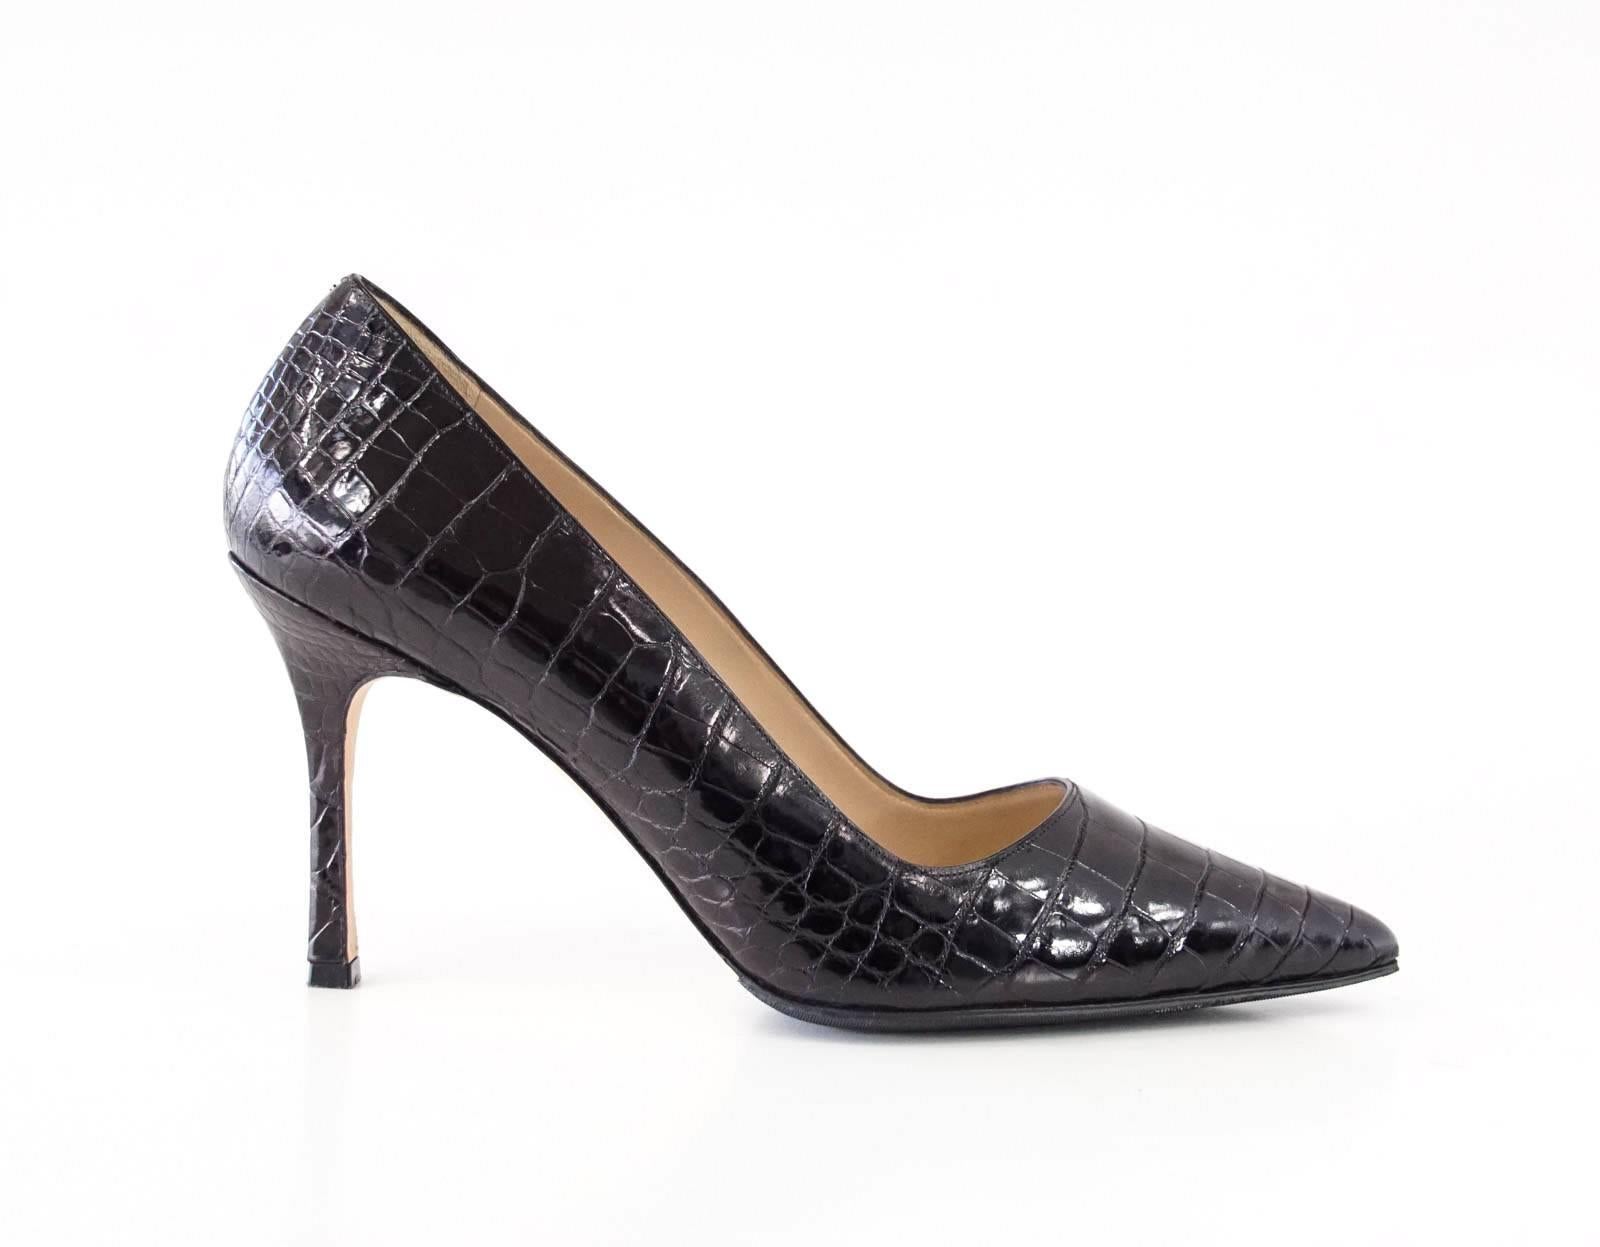 Guaranteed authentic MANOLO BLAHNIK matte alligator timeless pump.
Classic black alligator. 
Pointed toe and stiletto heel. 
Soles have already have protection put on.
Comes with sleeper.
NEW or NEVER WORN. 
final sale

SIZE 39
USA SIZE 9

SHOE